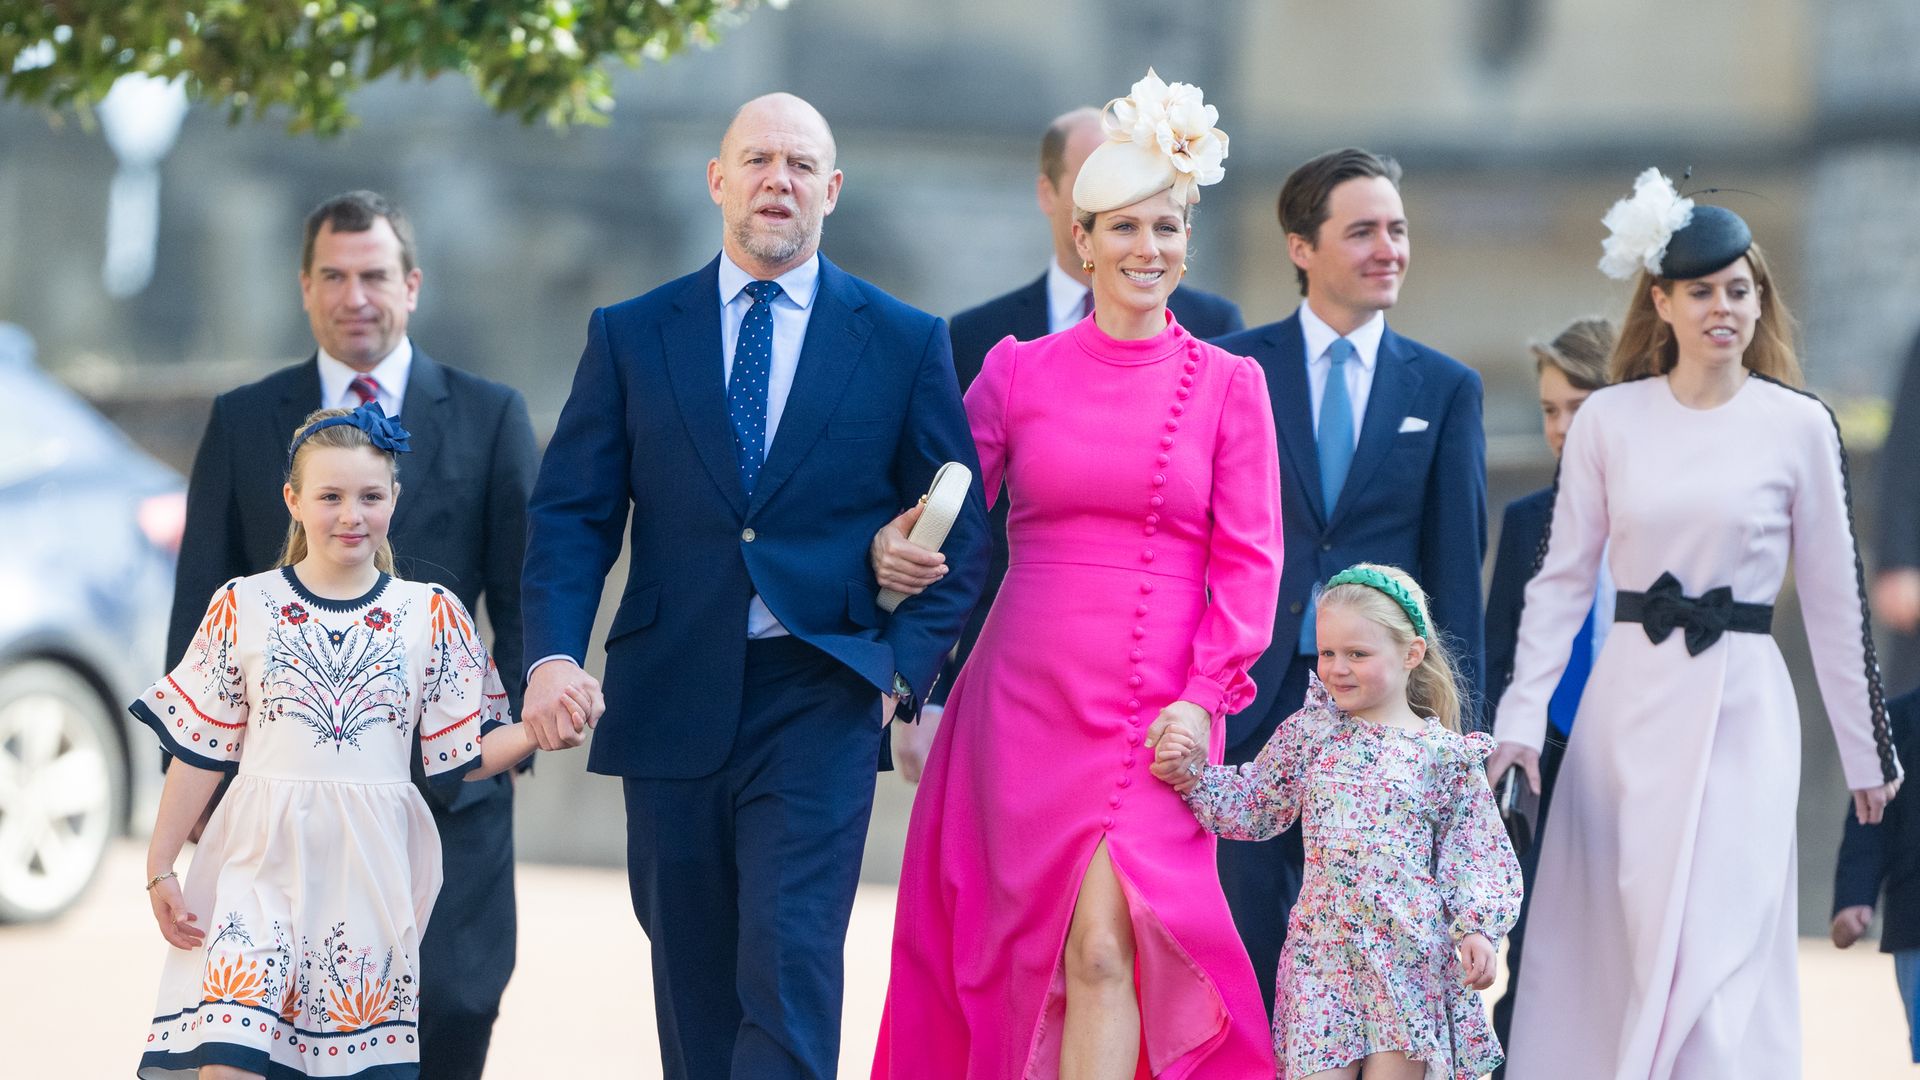 Mike and Zara Tindall attend Easter Sunday church service with daughters, Mia and Lena